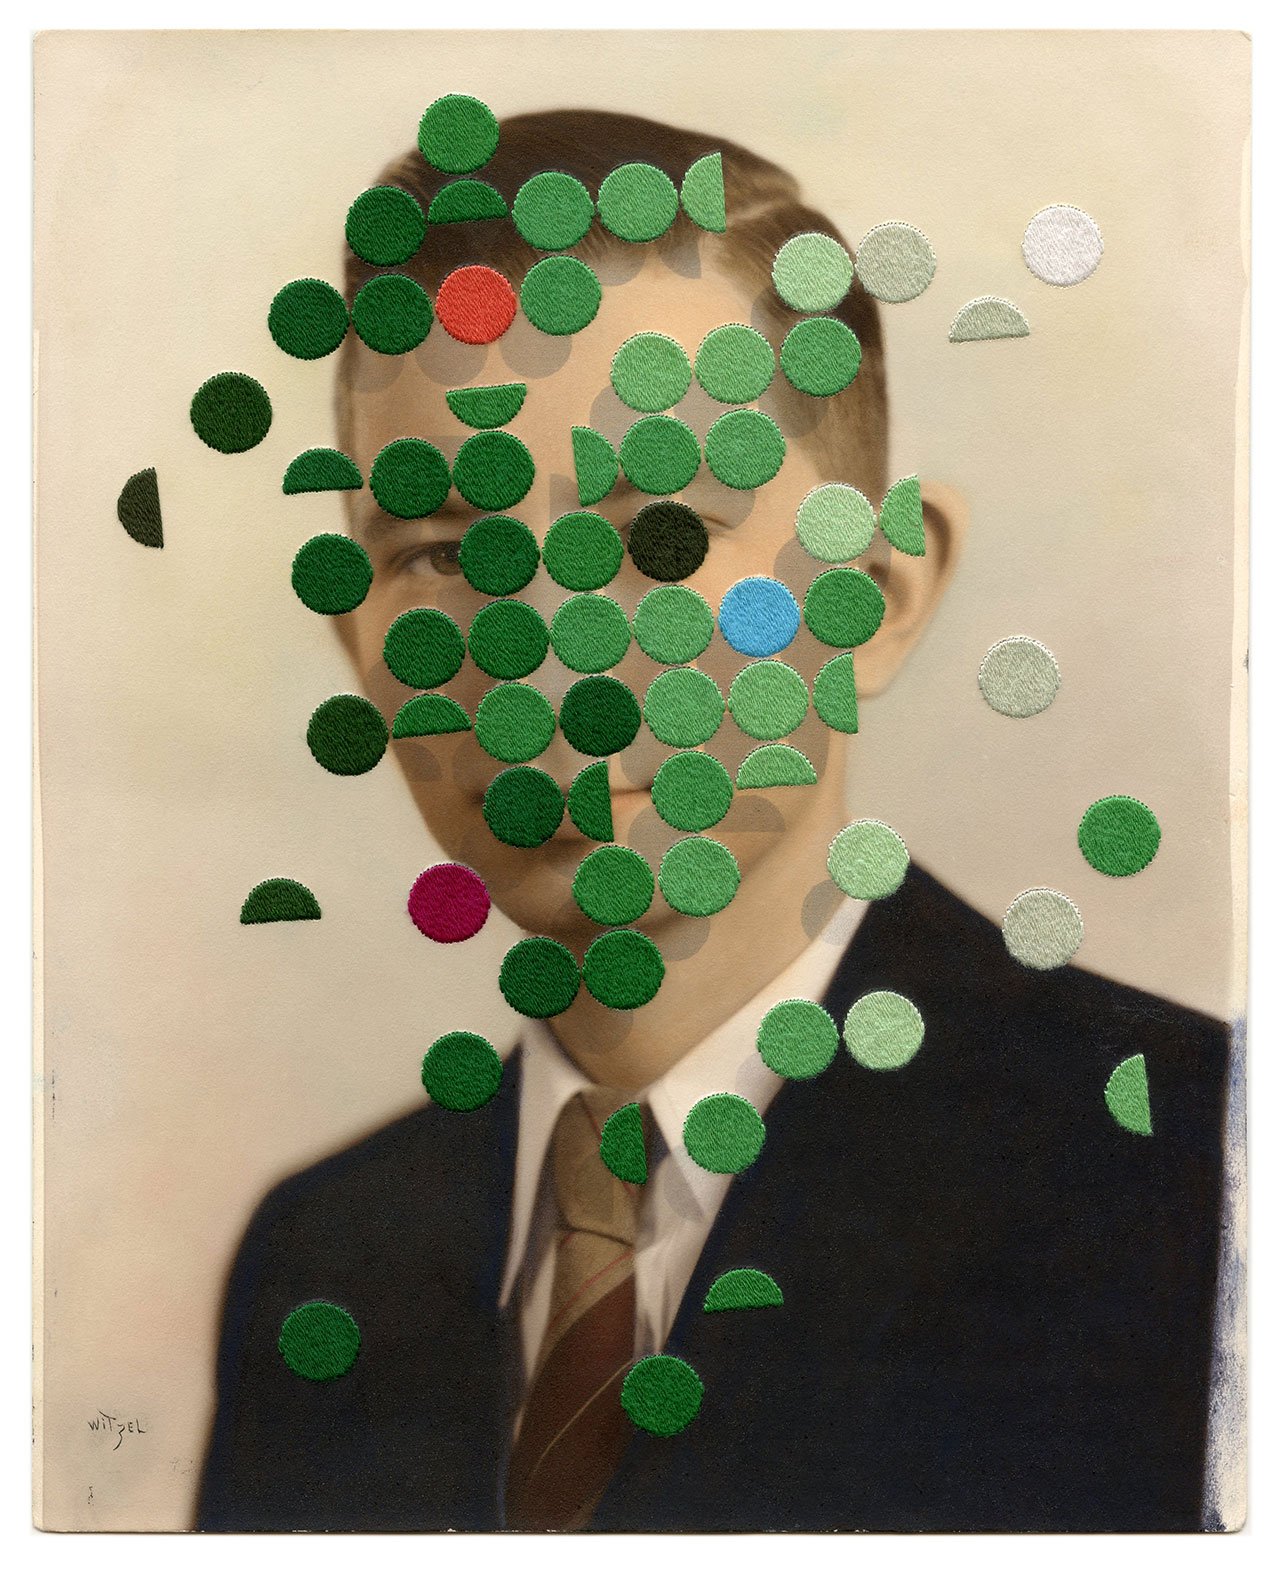 Julie Cockburn, The Ecologist, 2019. Hand embroidery and inkjet on found photograph. © Julie Cockburn, courtesy of Flowers Gallery.  